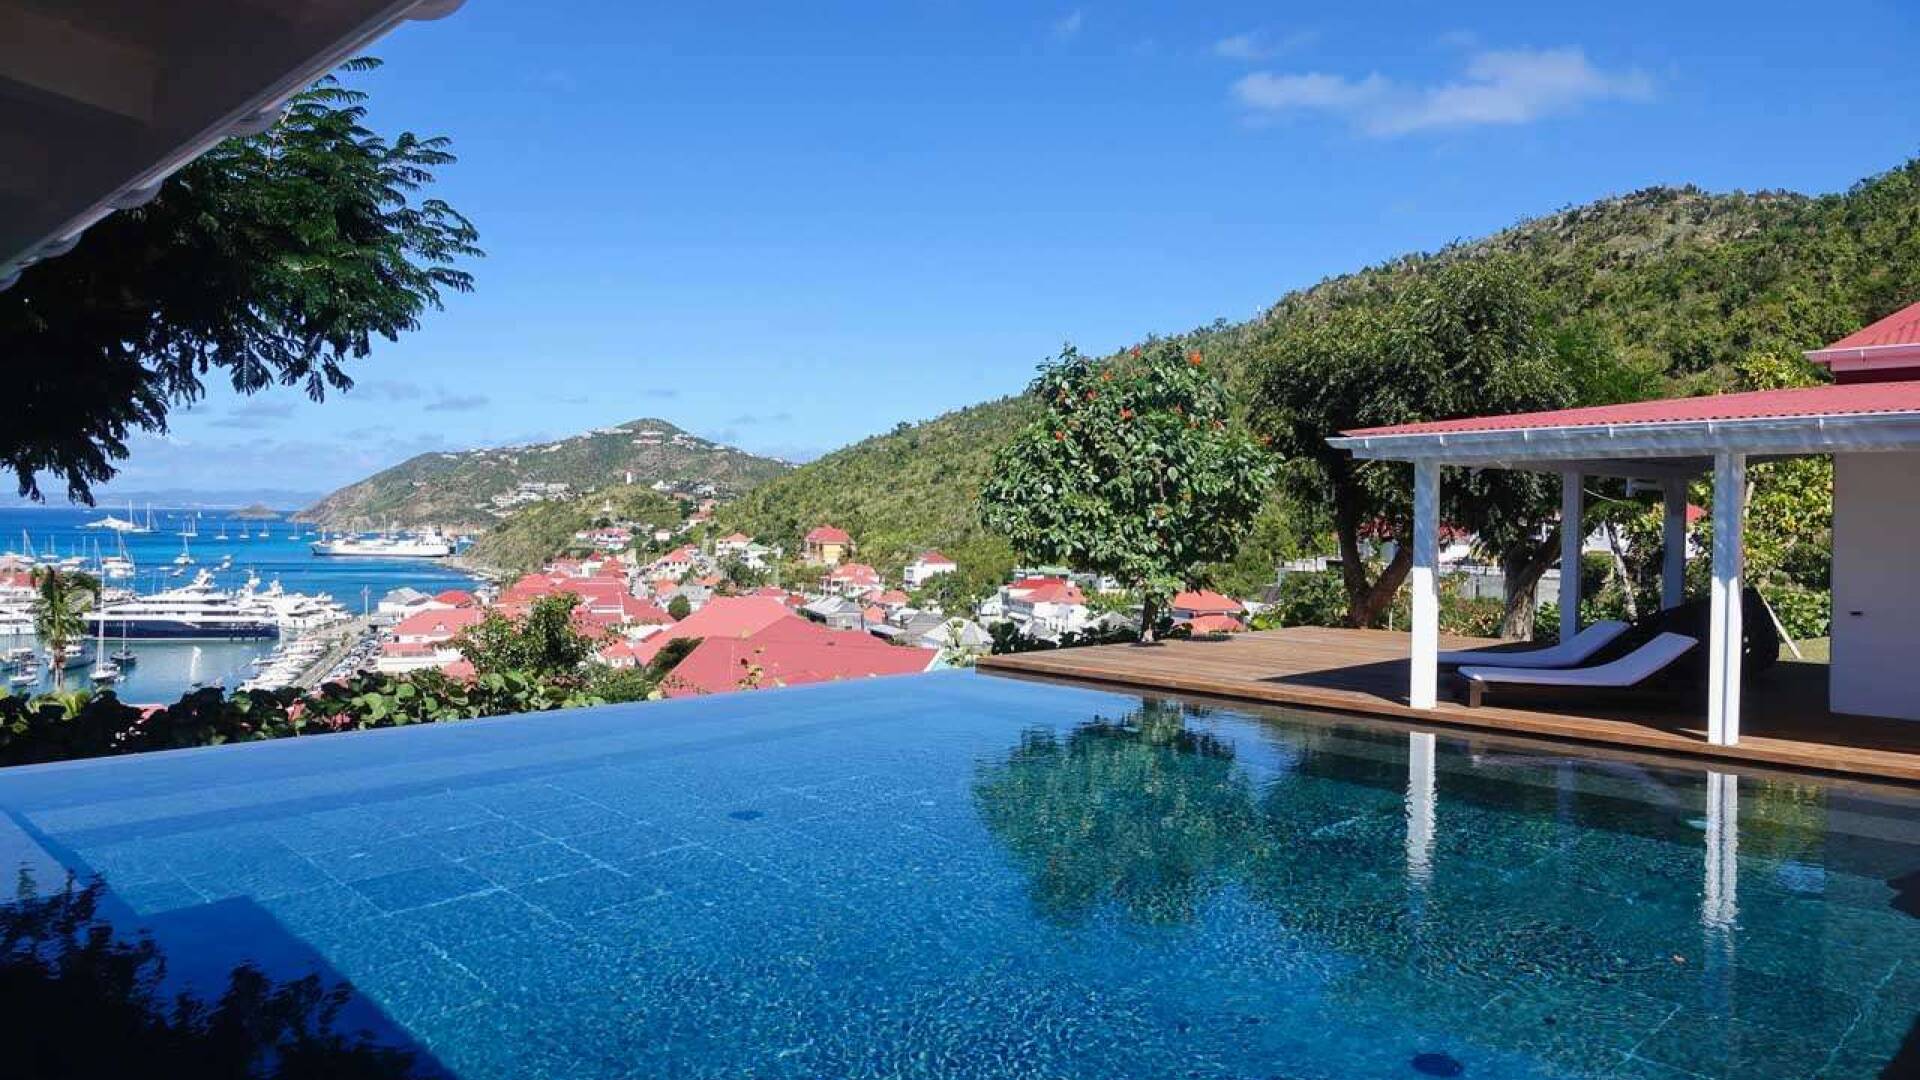 The view from WV ANG, Gustavia, St. Barthelemy